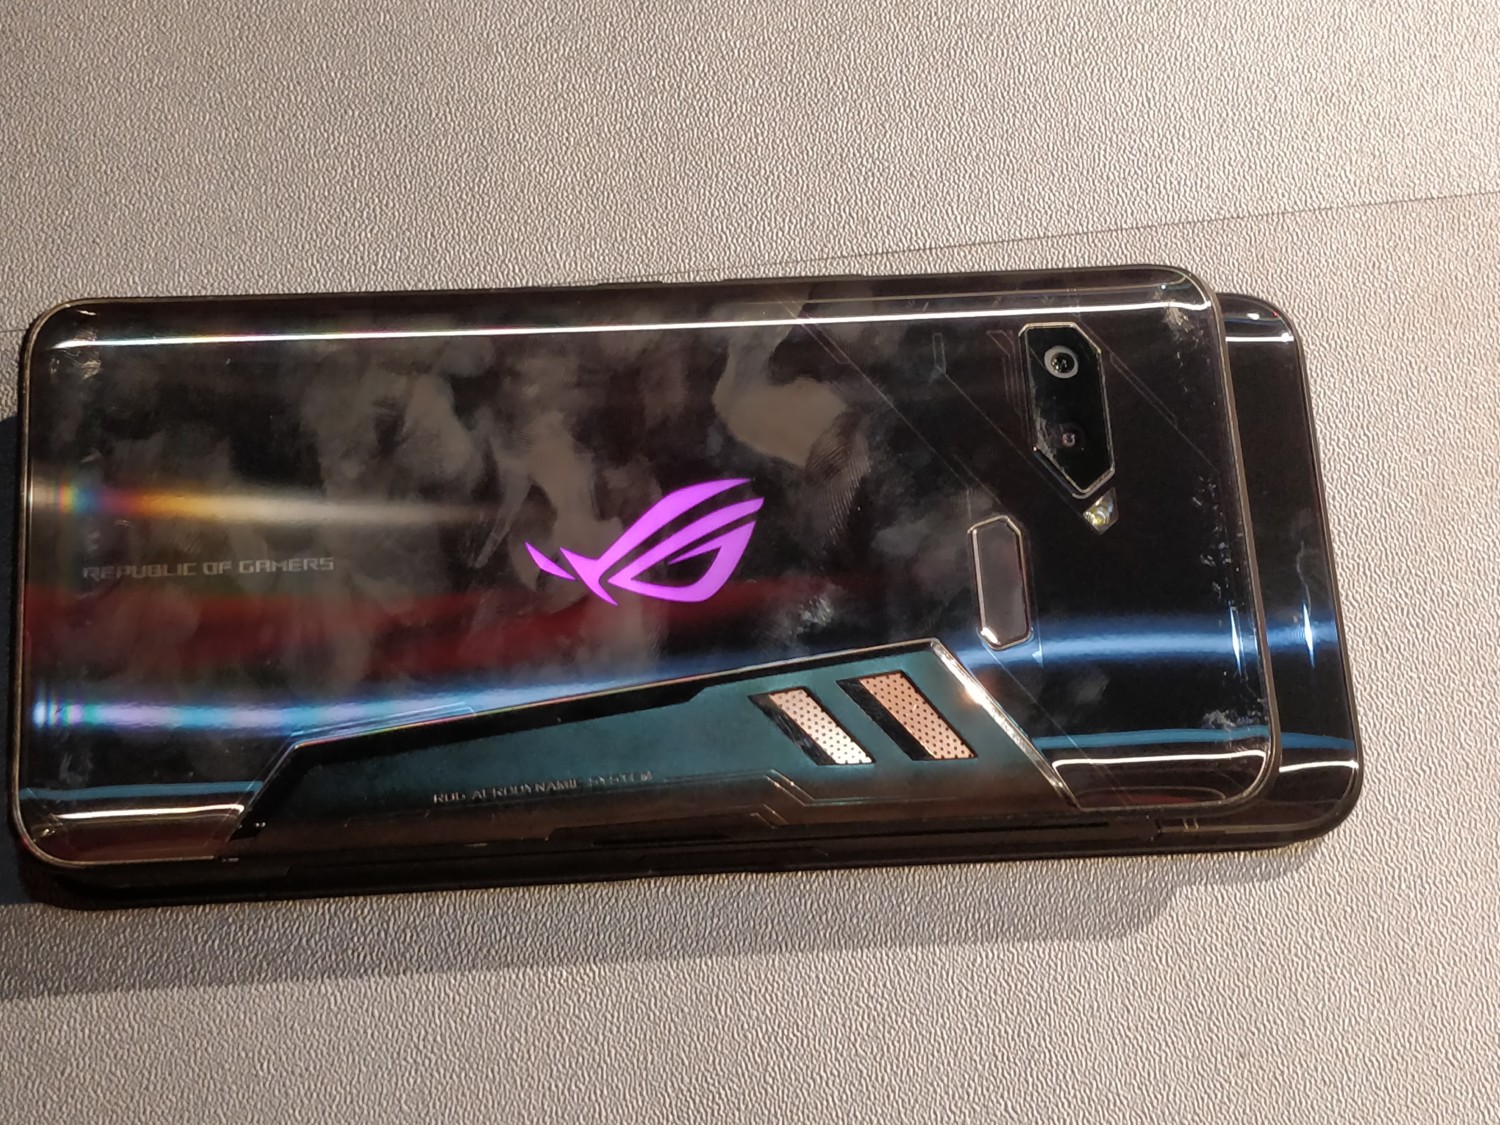 ASUS ROG Phone II Hands On and First Impressions - ROG Phone 2